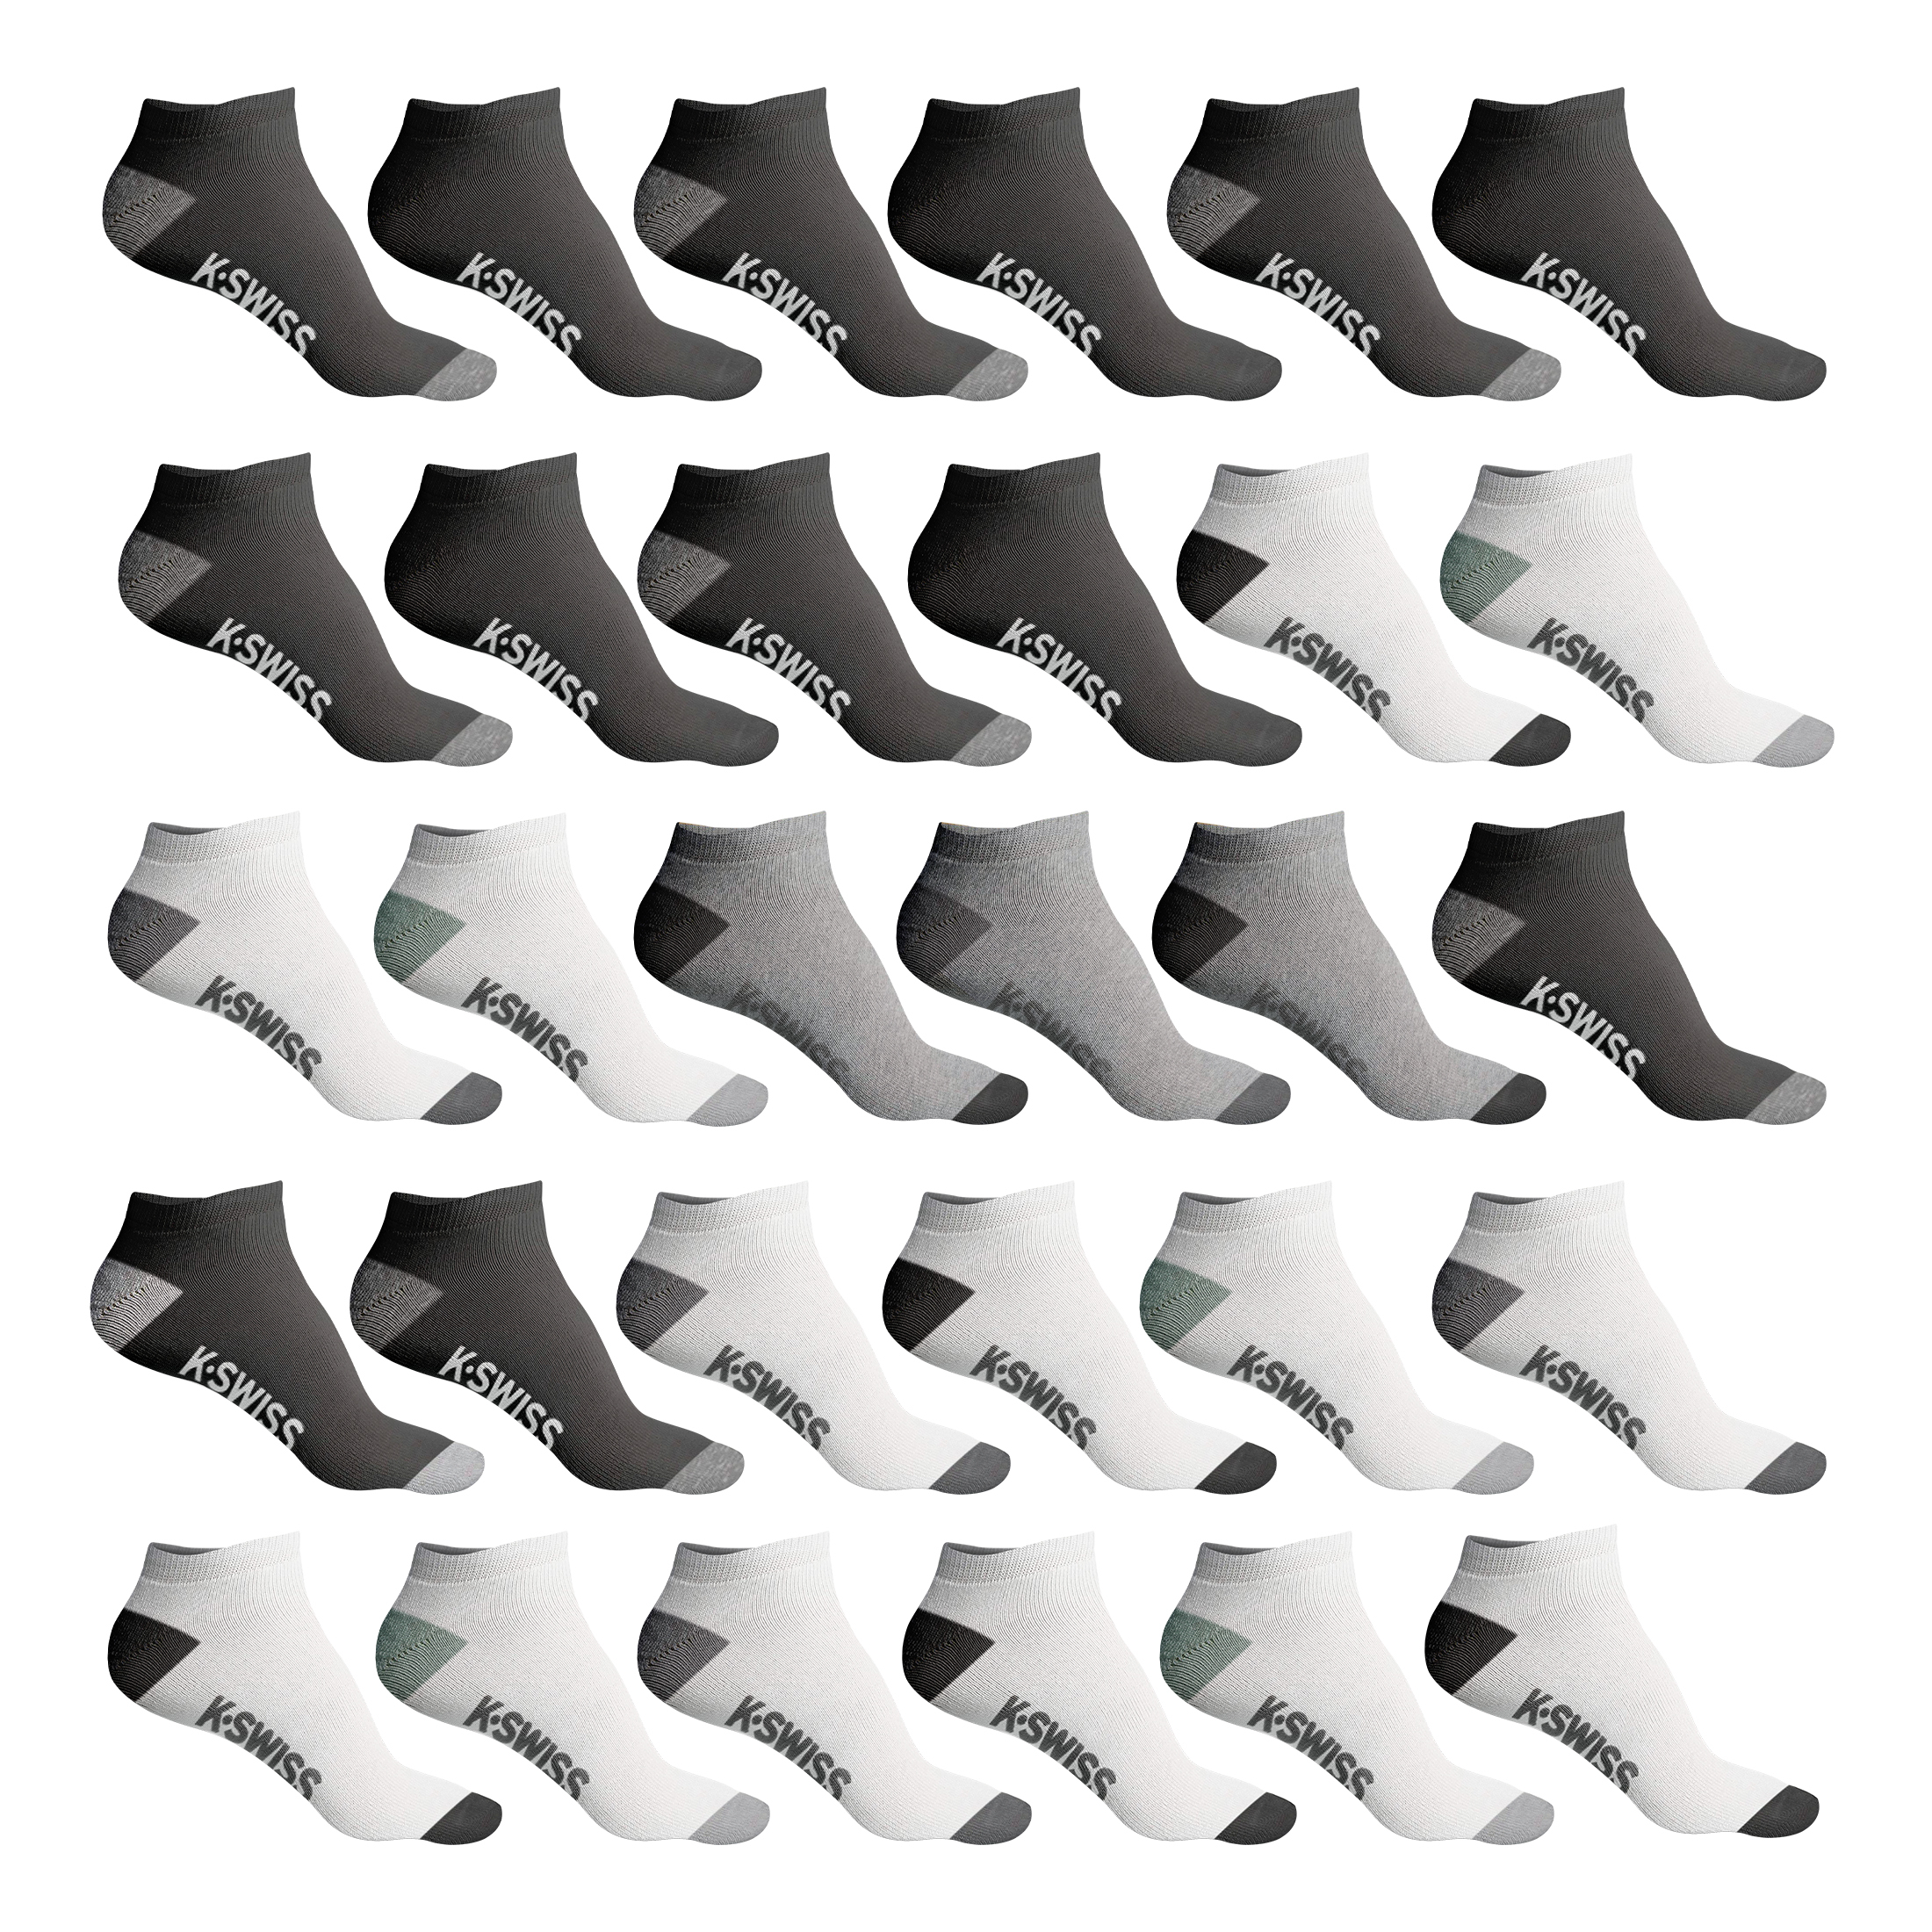 20-Pairs: Men's Athletic Comfort No Show Low Cut Ankle Socks For Running